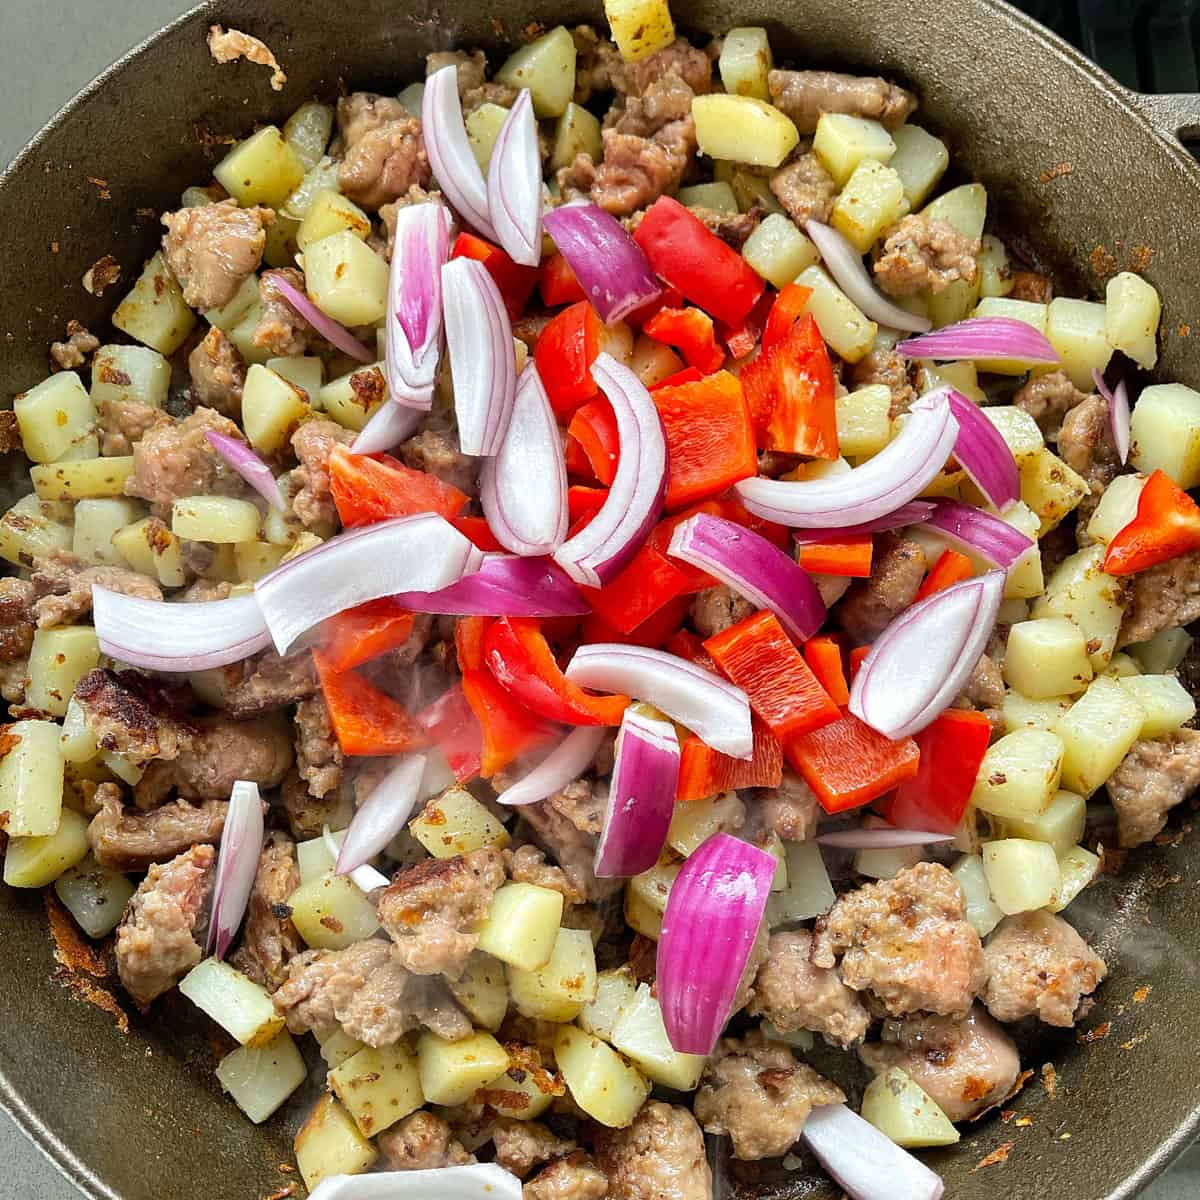 Fried potatoes and sausages in a large pan with fresh red onion and capsicum added.